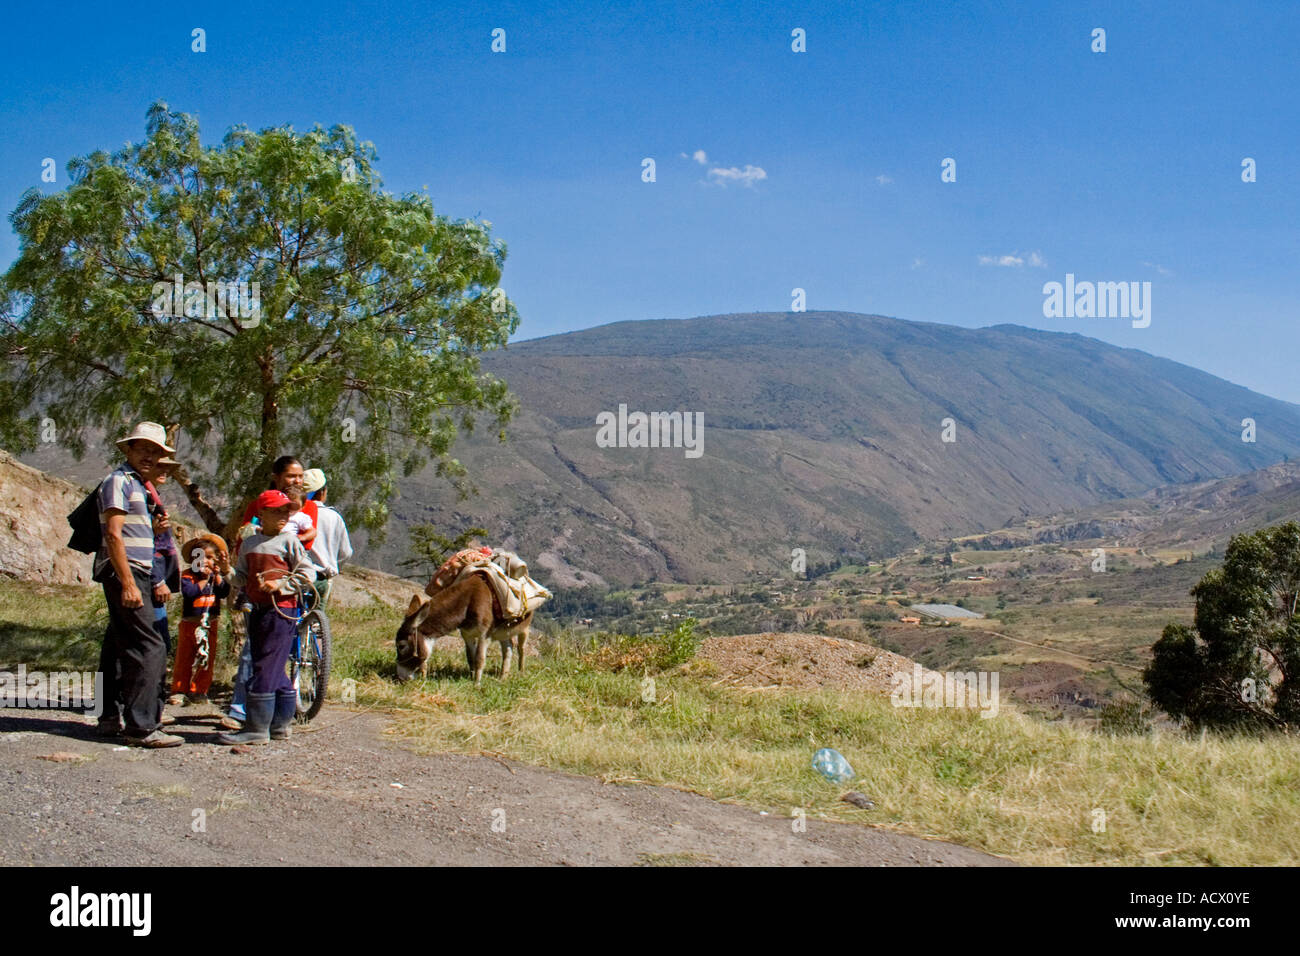 A family of agriculturists with their mule resting on the board of the road. Villa de Leyva, Colombia, South America Stock Photo